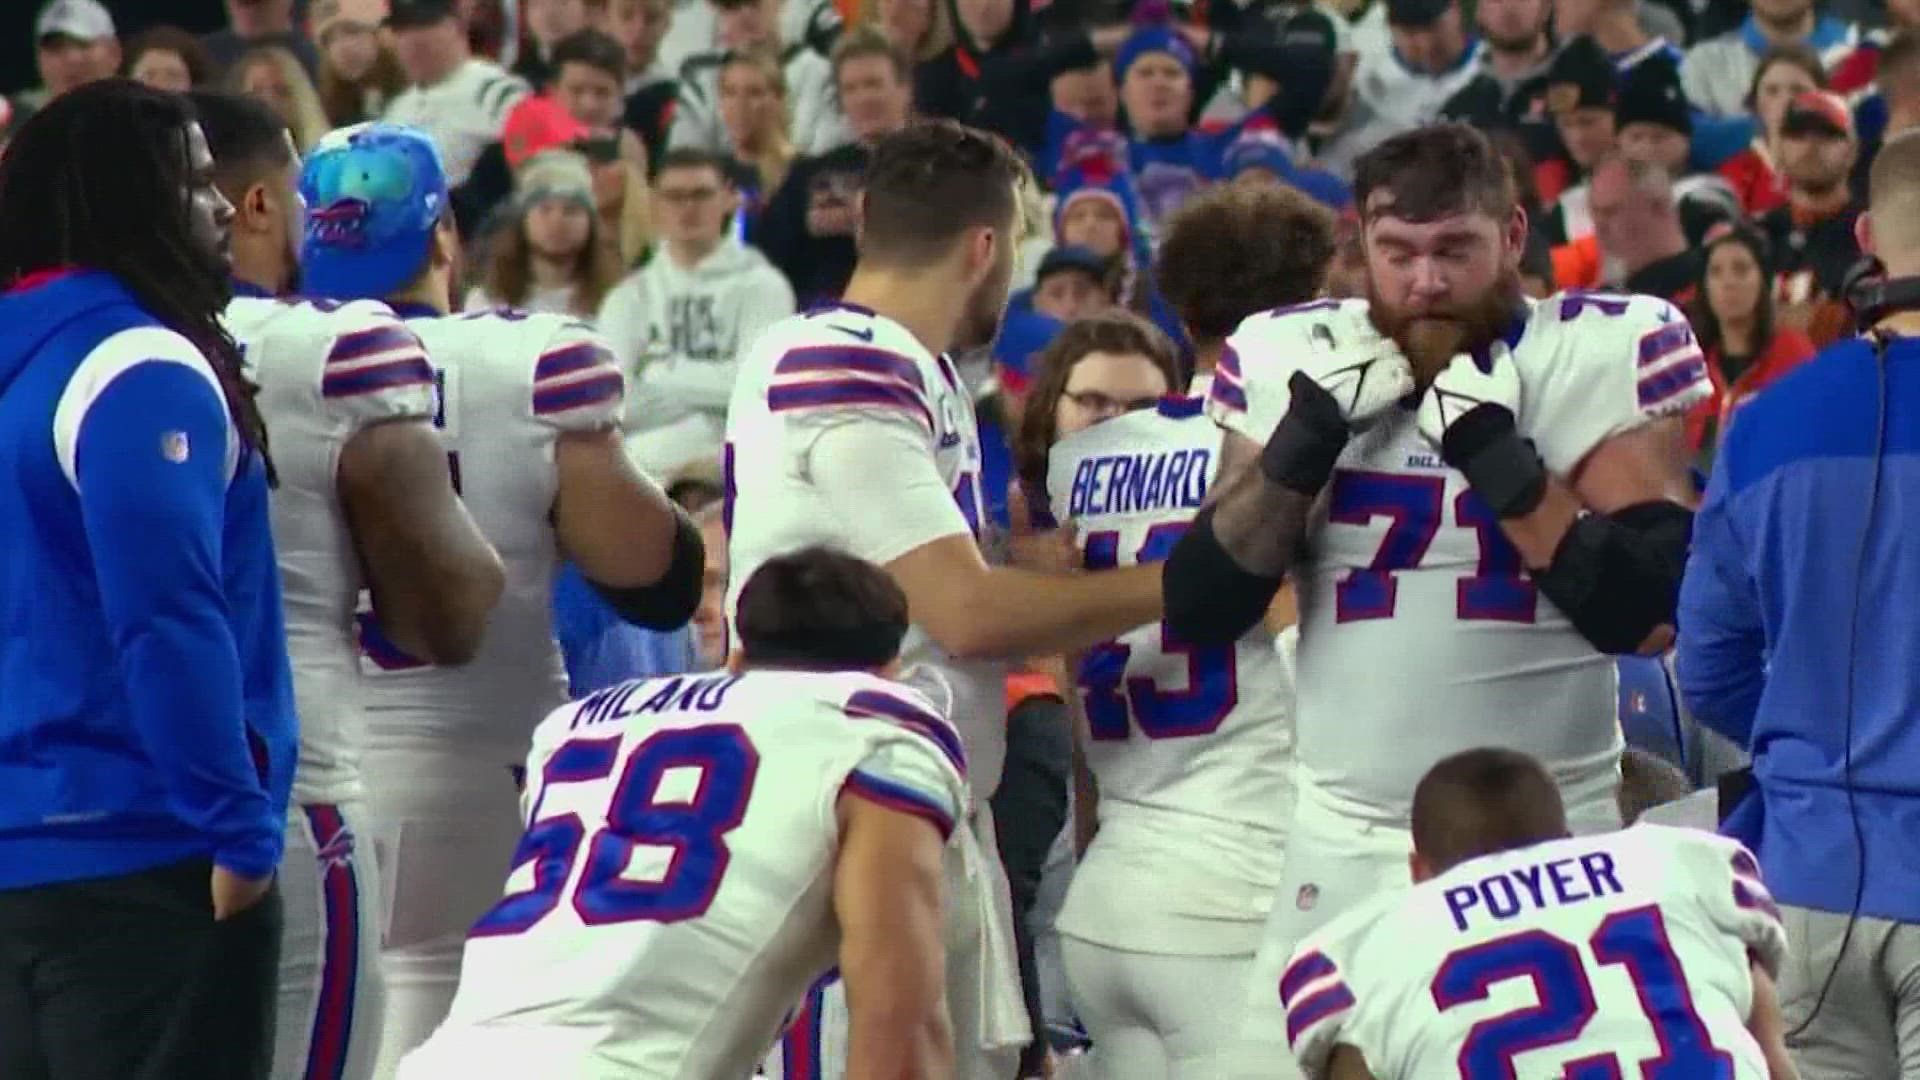 The Buffalo Bills tweeted early Tuesday morning that Damar Hamlin suffered a cardiac arrest following a tackle in the game. He remains in critical condition.